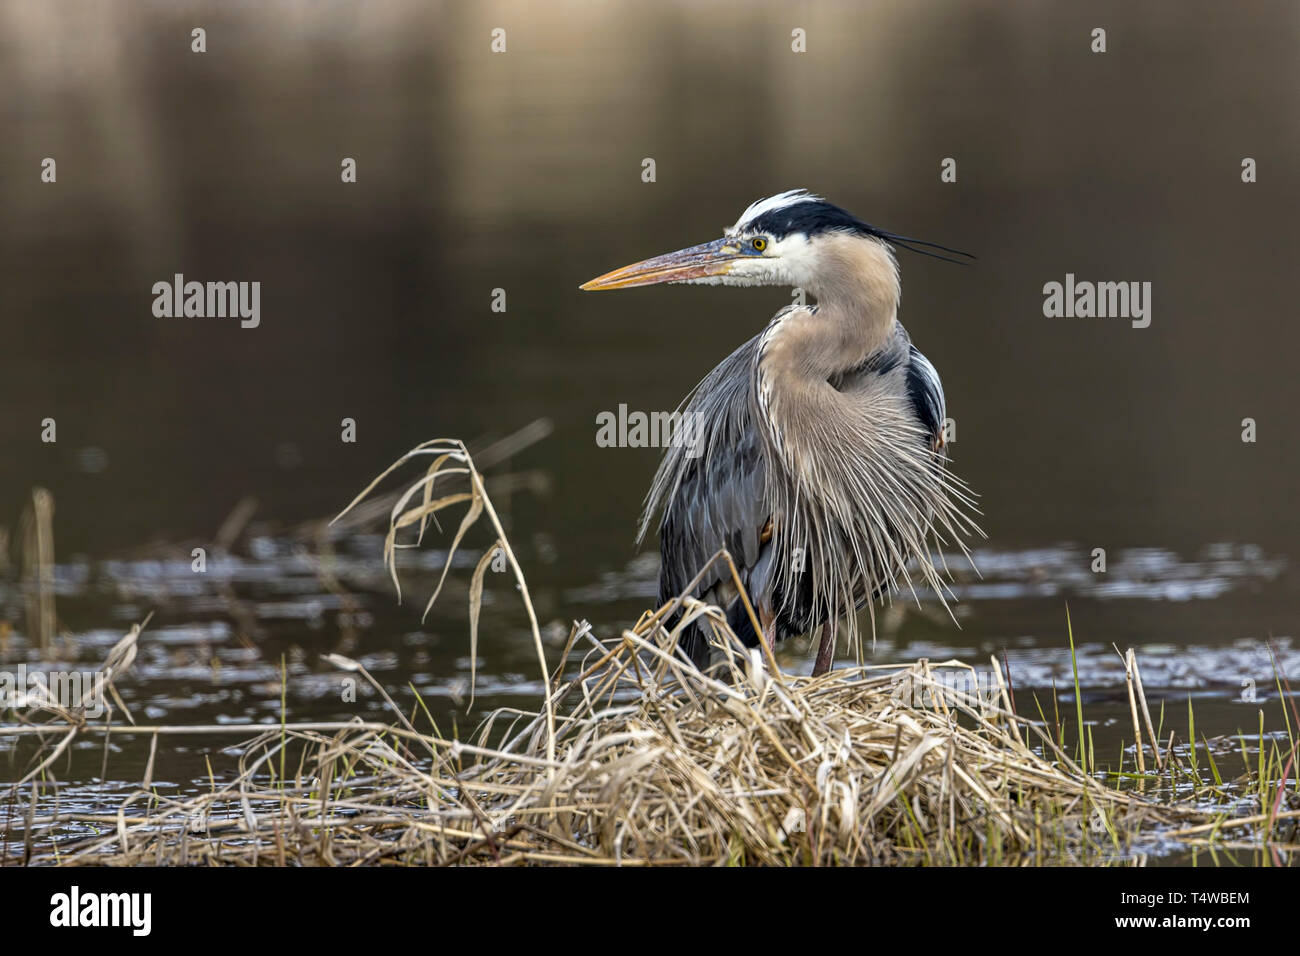 A portraiture type photo of a great blue heron by Hauser Lake in north Idaho. Stock Photo